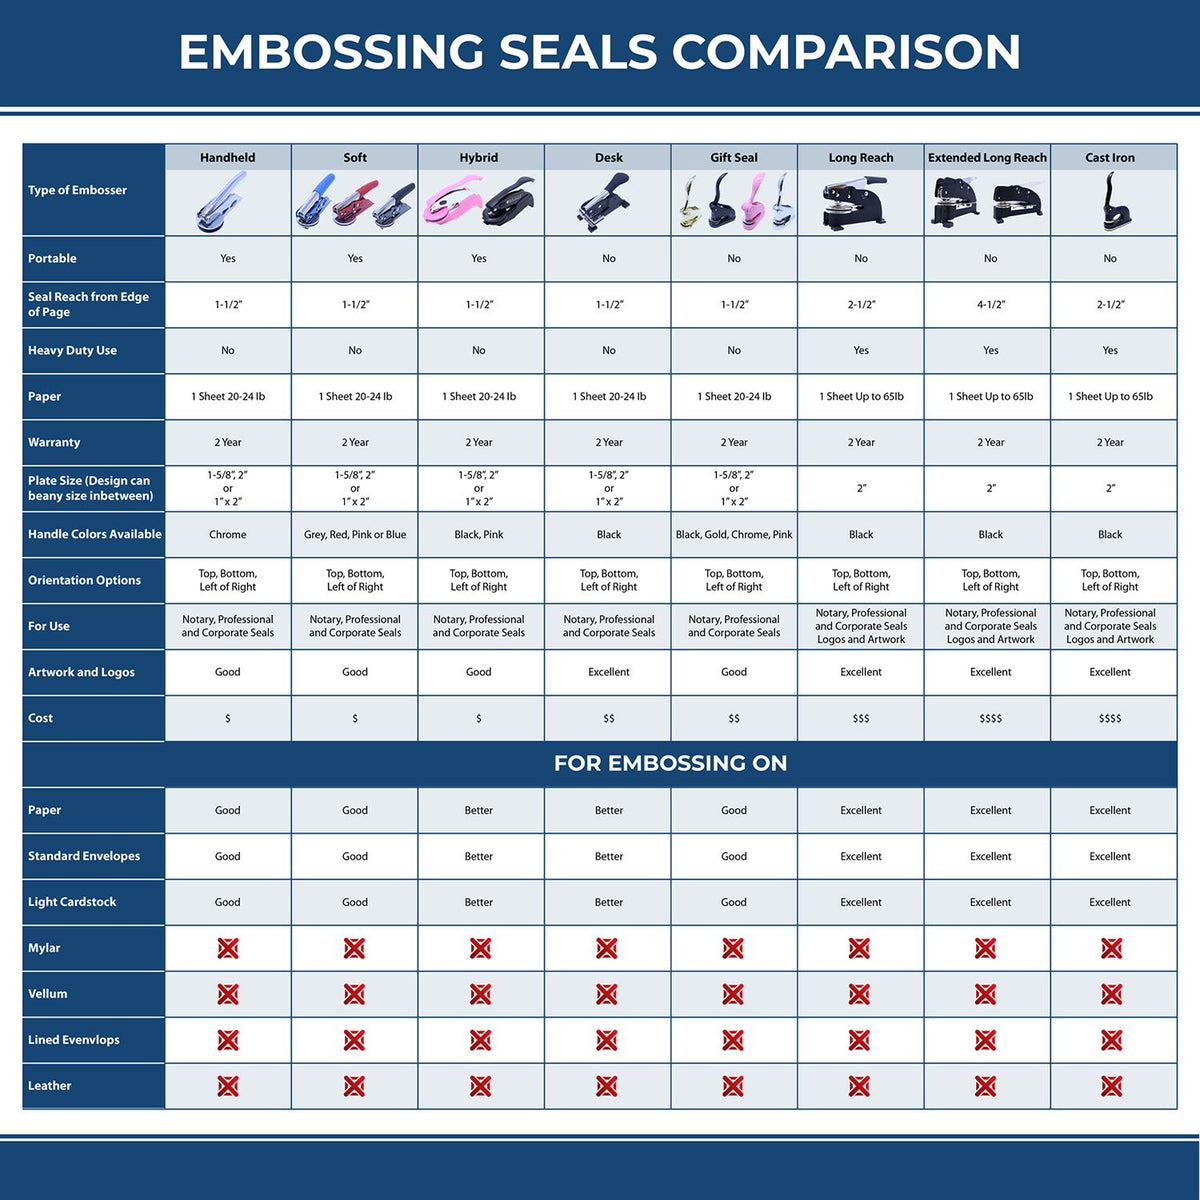 A comparison chart for the different types of mount models available for the Handheld Pennsylvania Professional Geologist Embosser